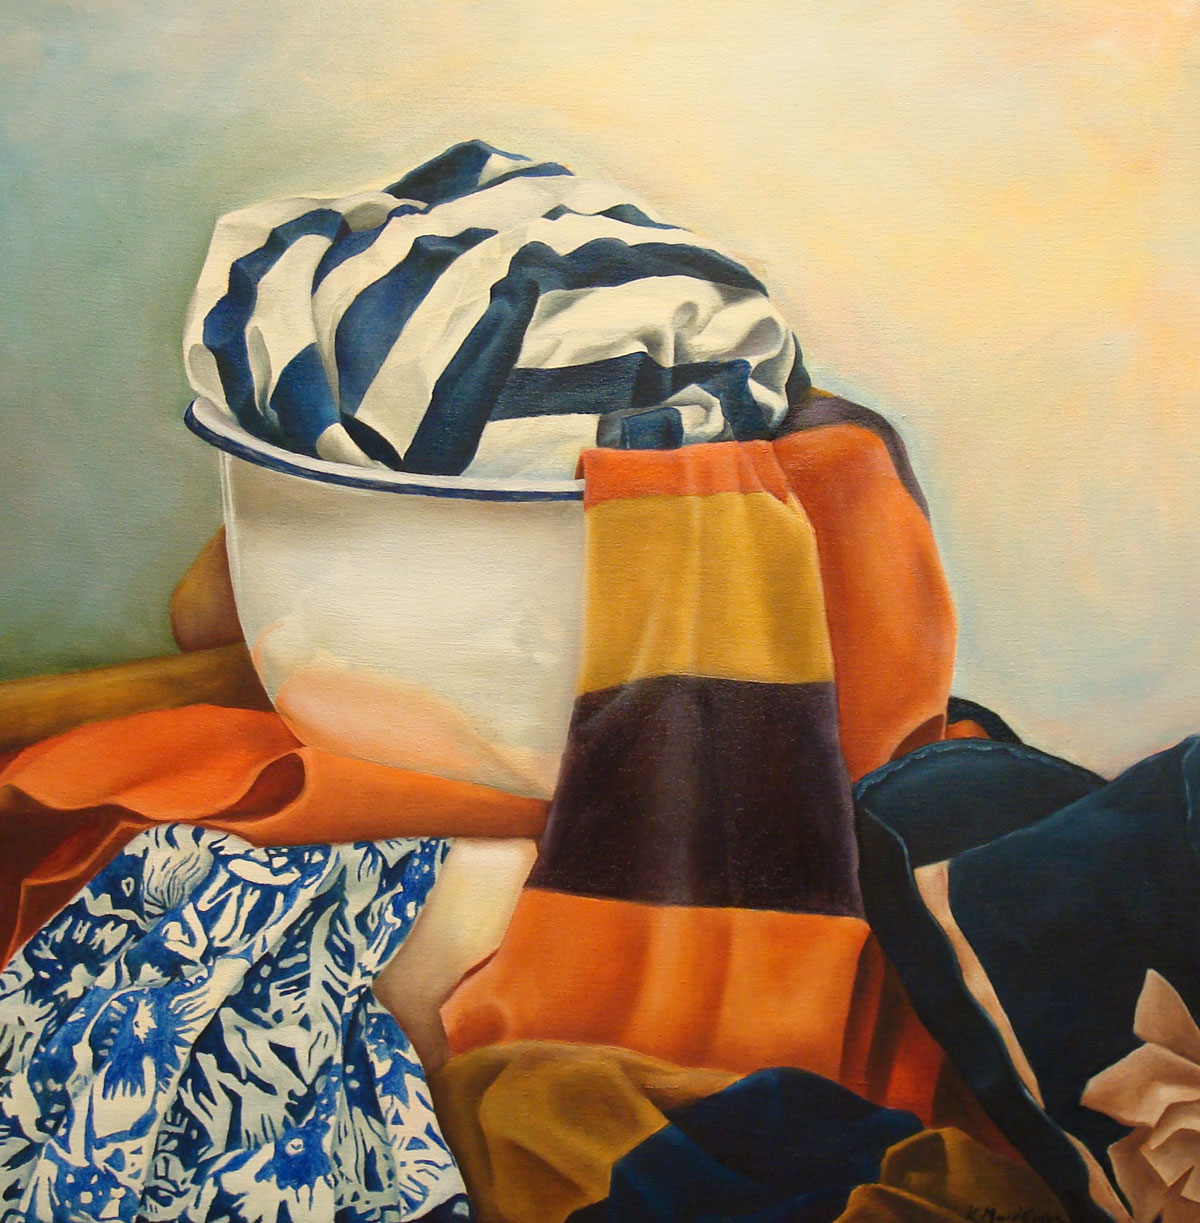 Still life with bowl, fabric, and hat.